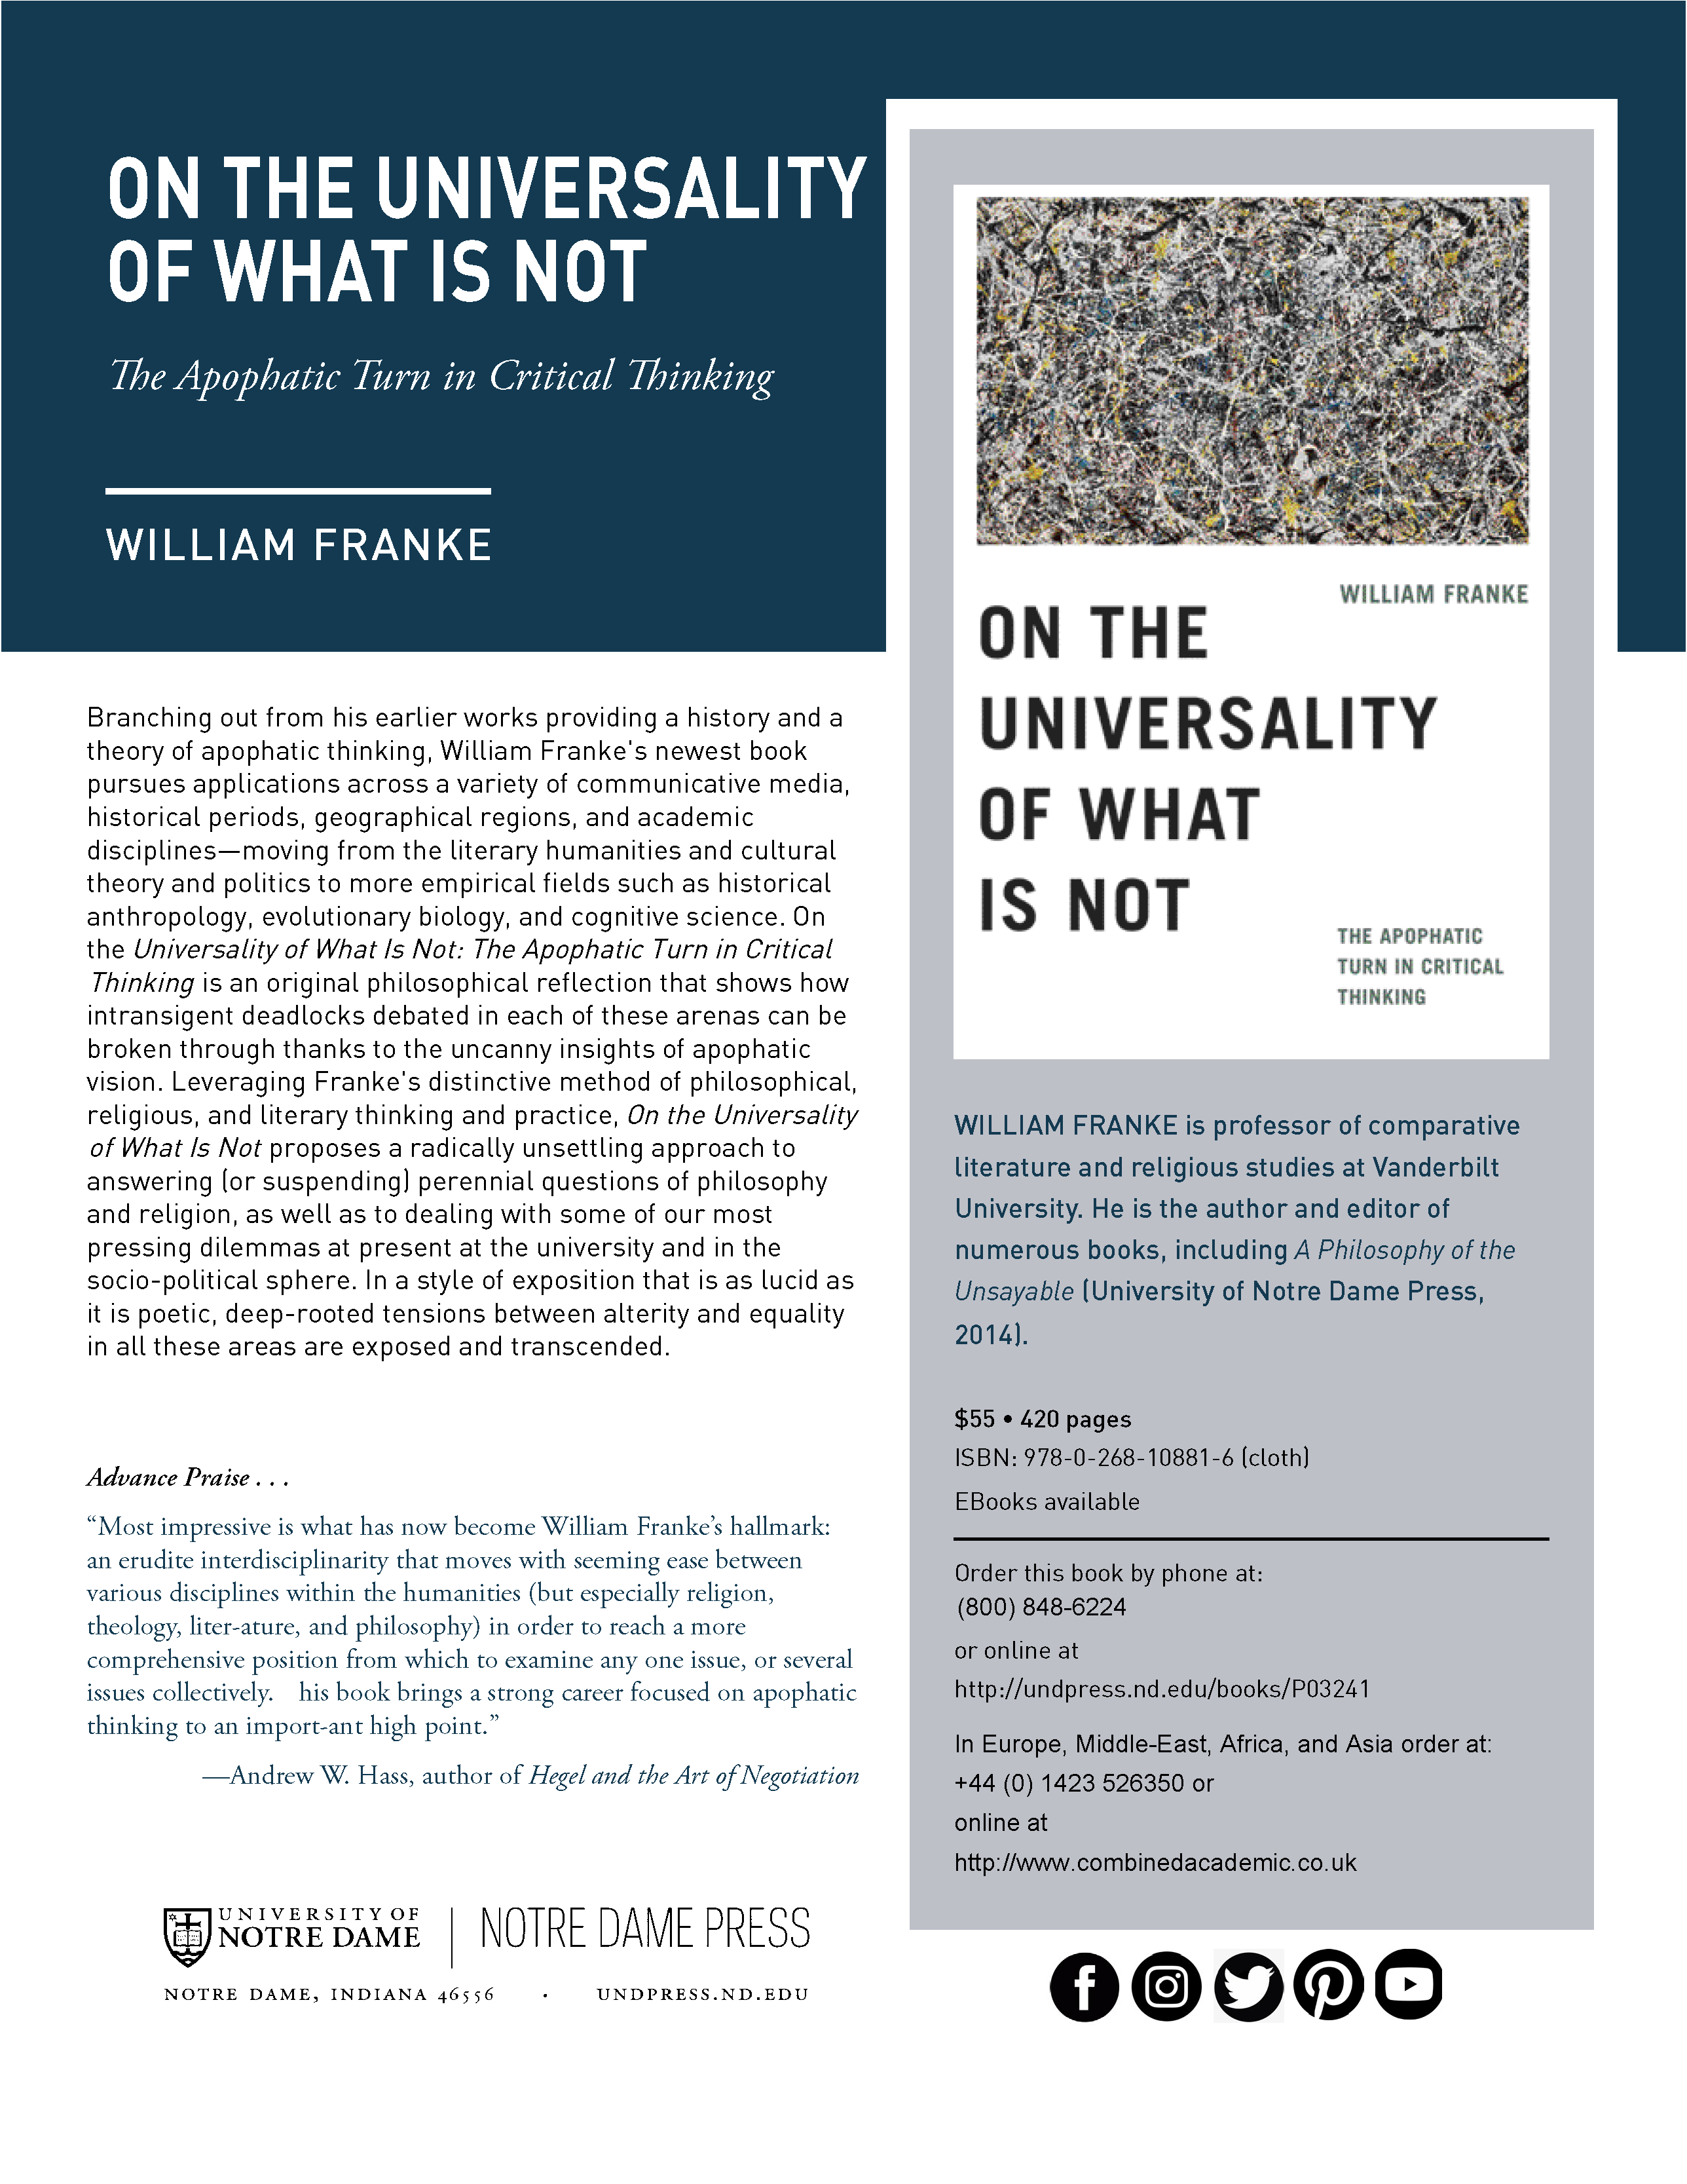 on the universality of what is not Franke full page flyer